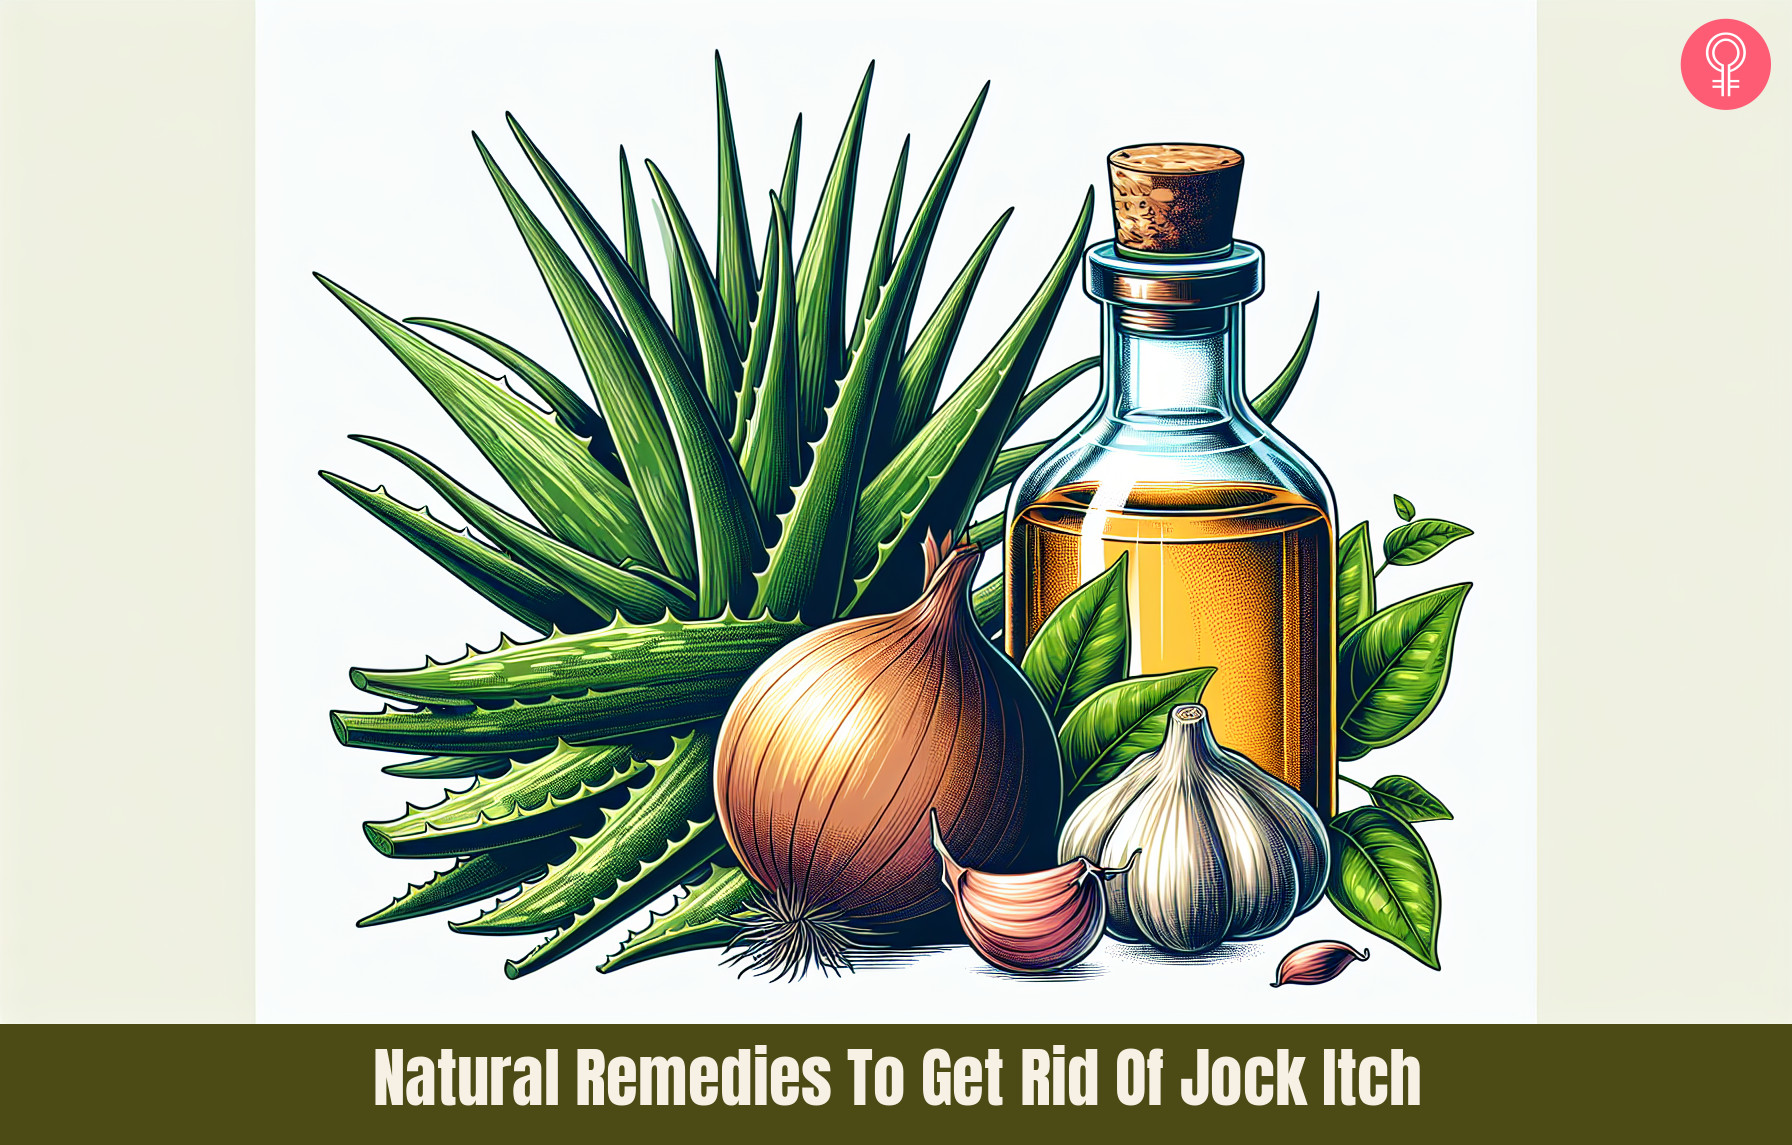 How To Cure Jock Itch? Home Remedies